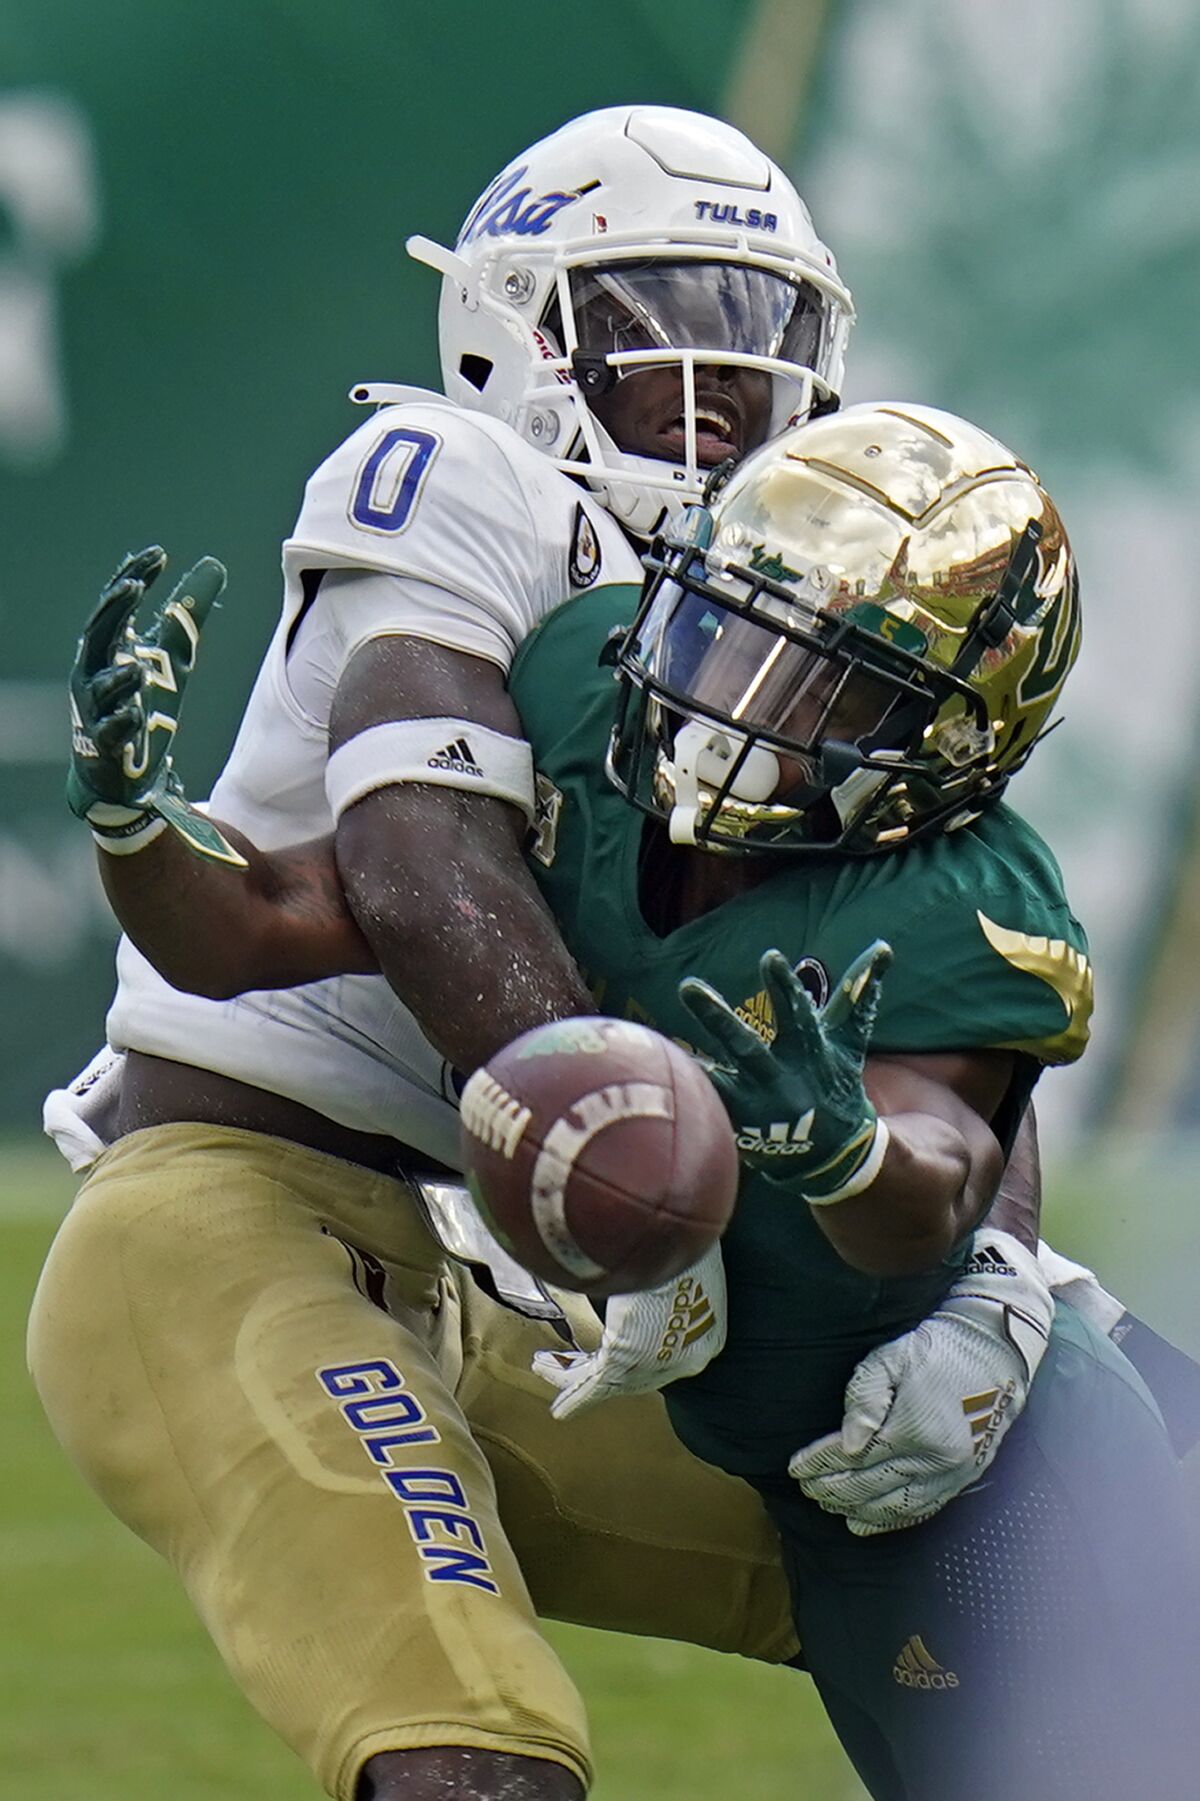 South Florida wide receiver Jimmy Horn Jr. (5) loses the football after getting hit by Tulsa cornerback Tyon Davis (0) during the second half of an NCAA college football game Saturday, Oct. 16, 2021, in Tampa, Fla. (AP Photo/Chris O'Meara)